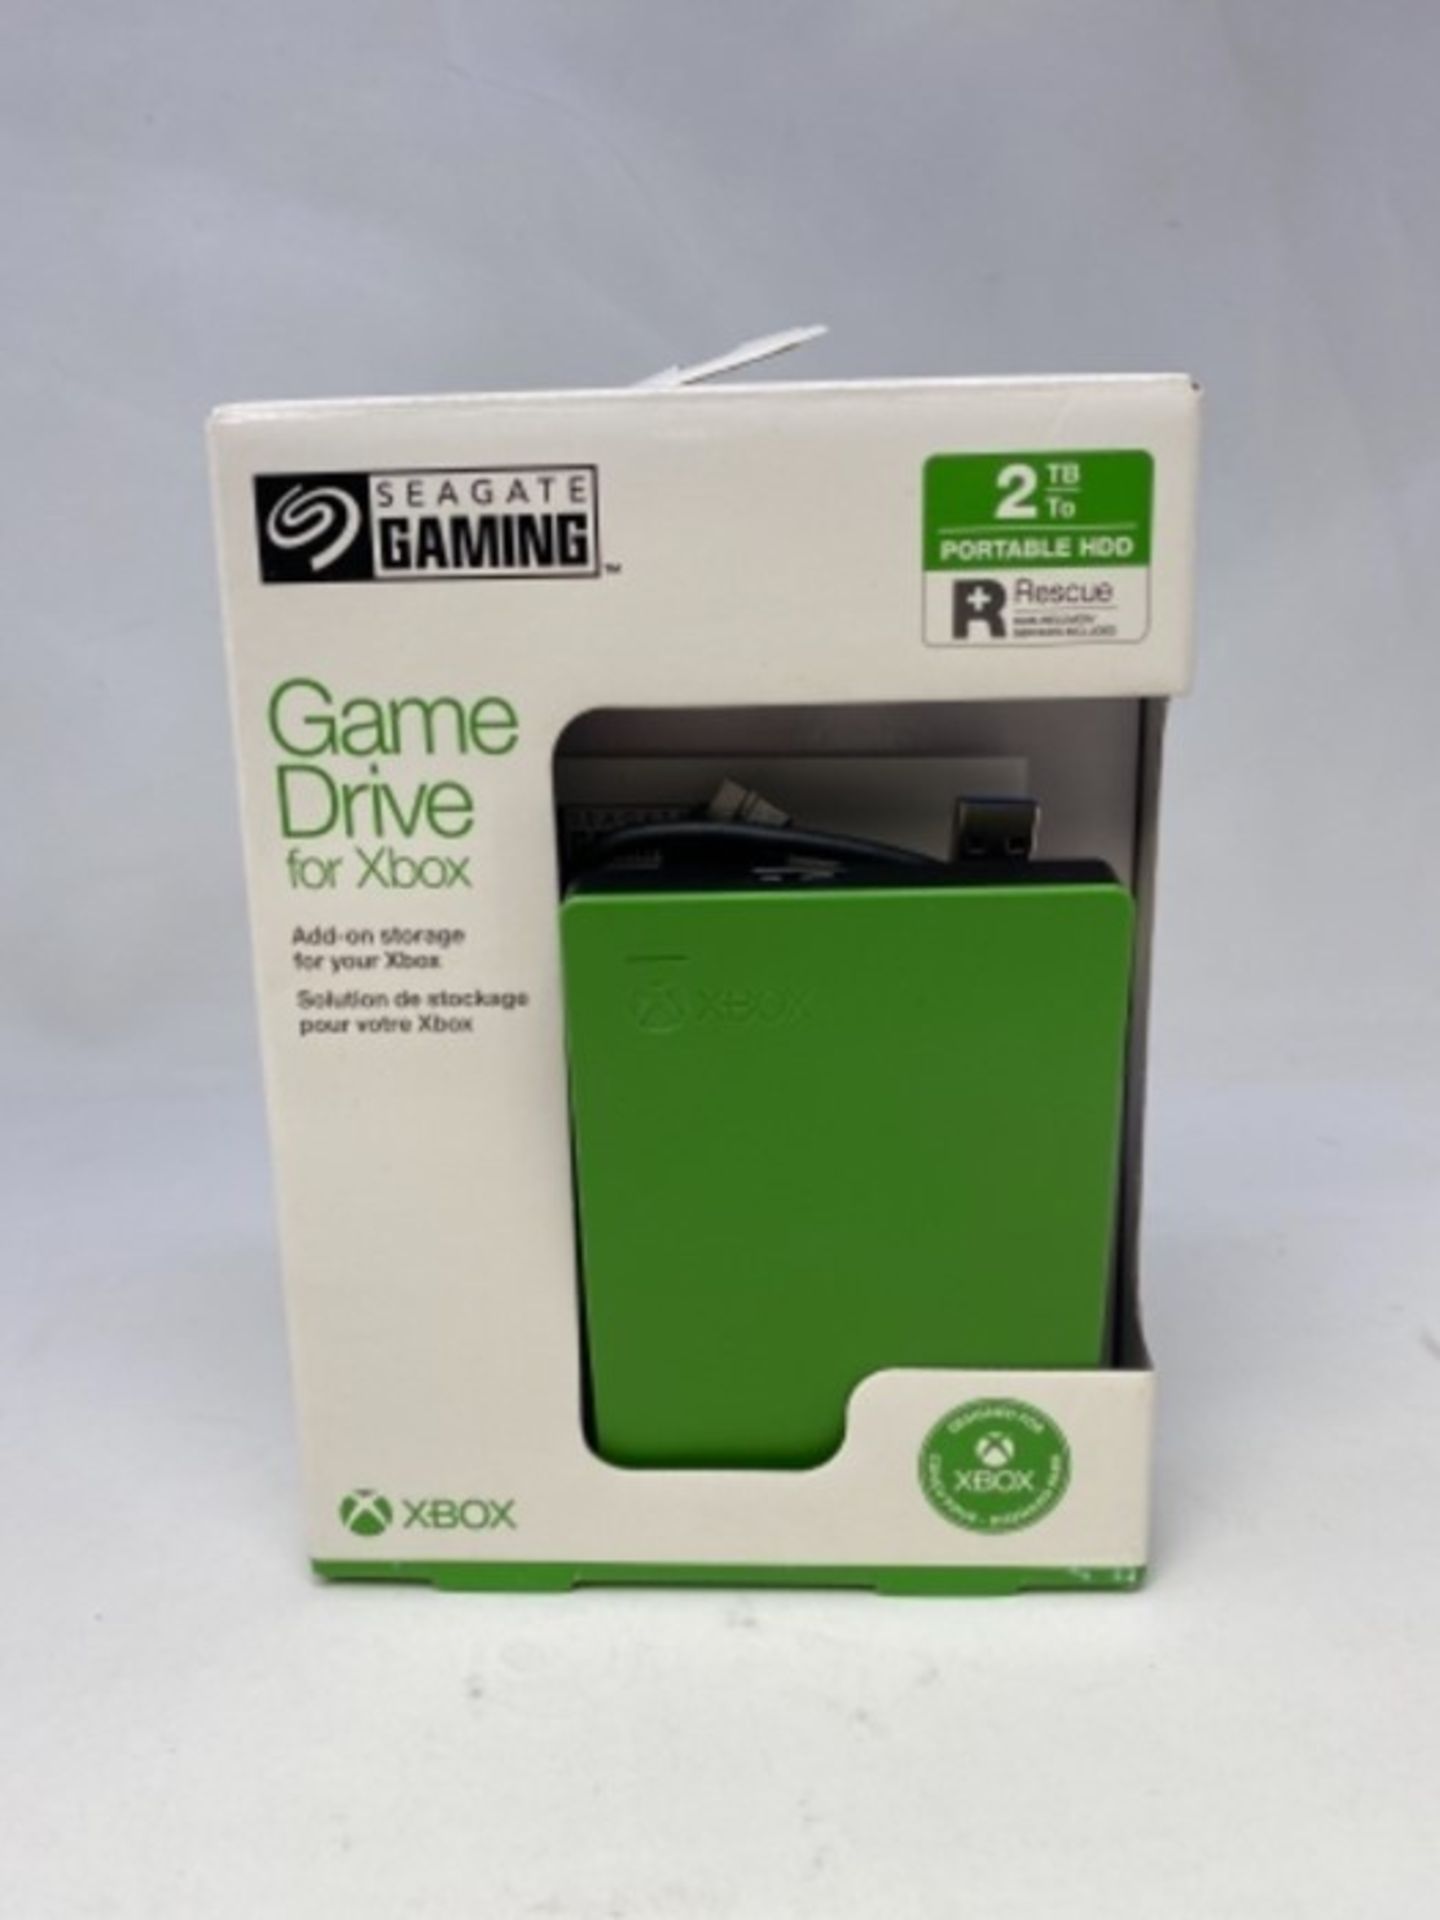 RRP £62.00 Seagate Game Drive for Xbox, 2 TB, External Hard Drive Portable HDD, Designed for Xbox - Image 2 of 2